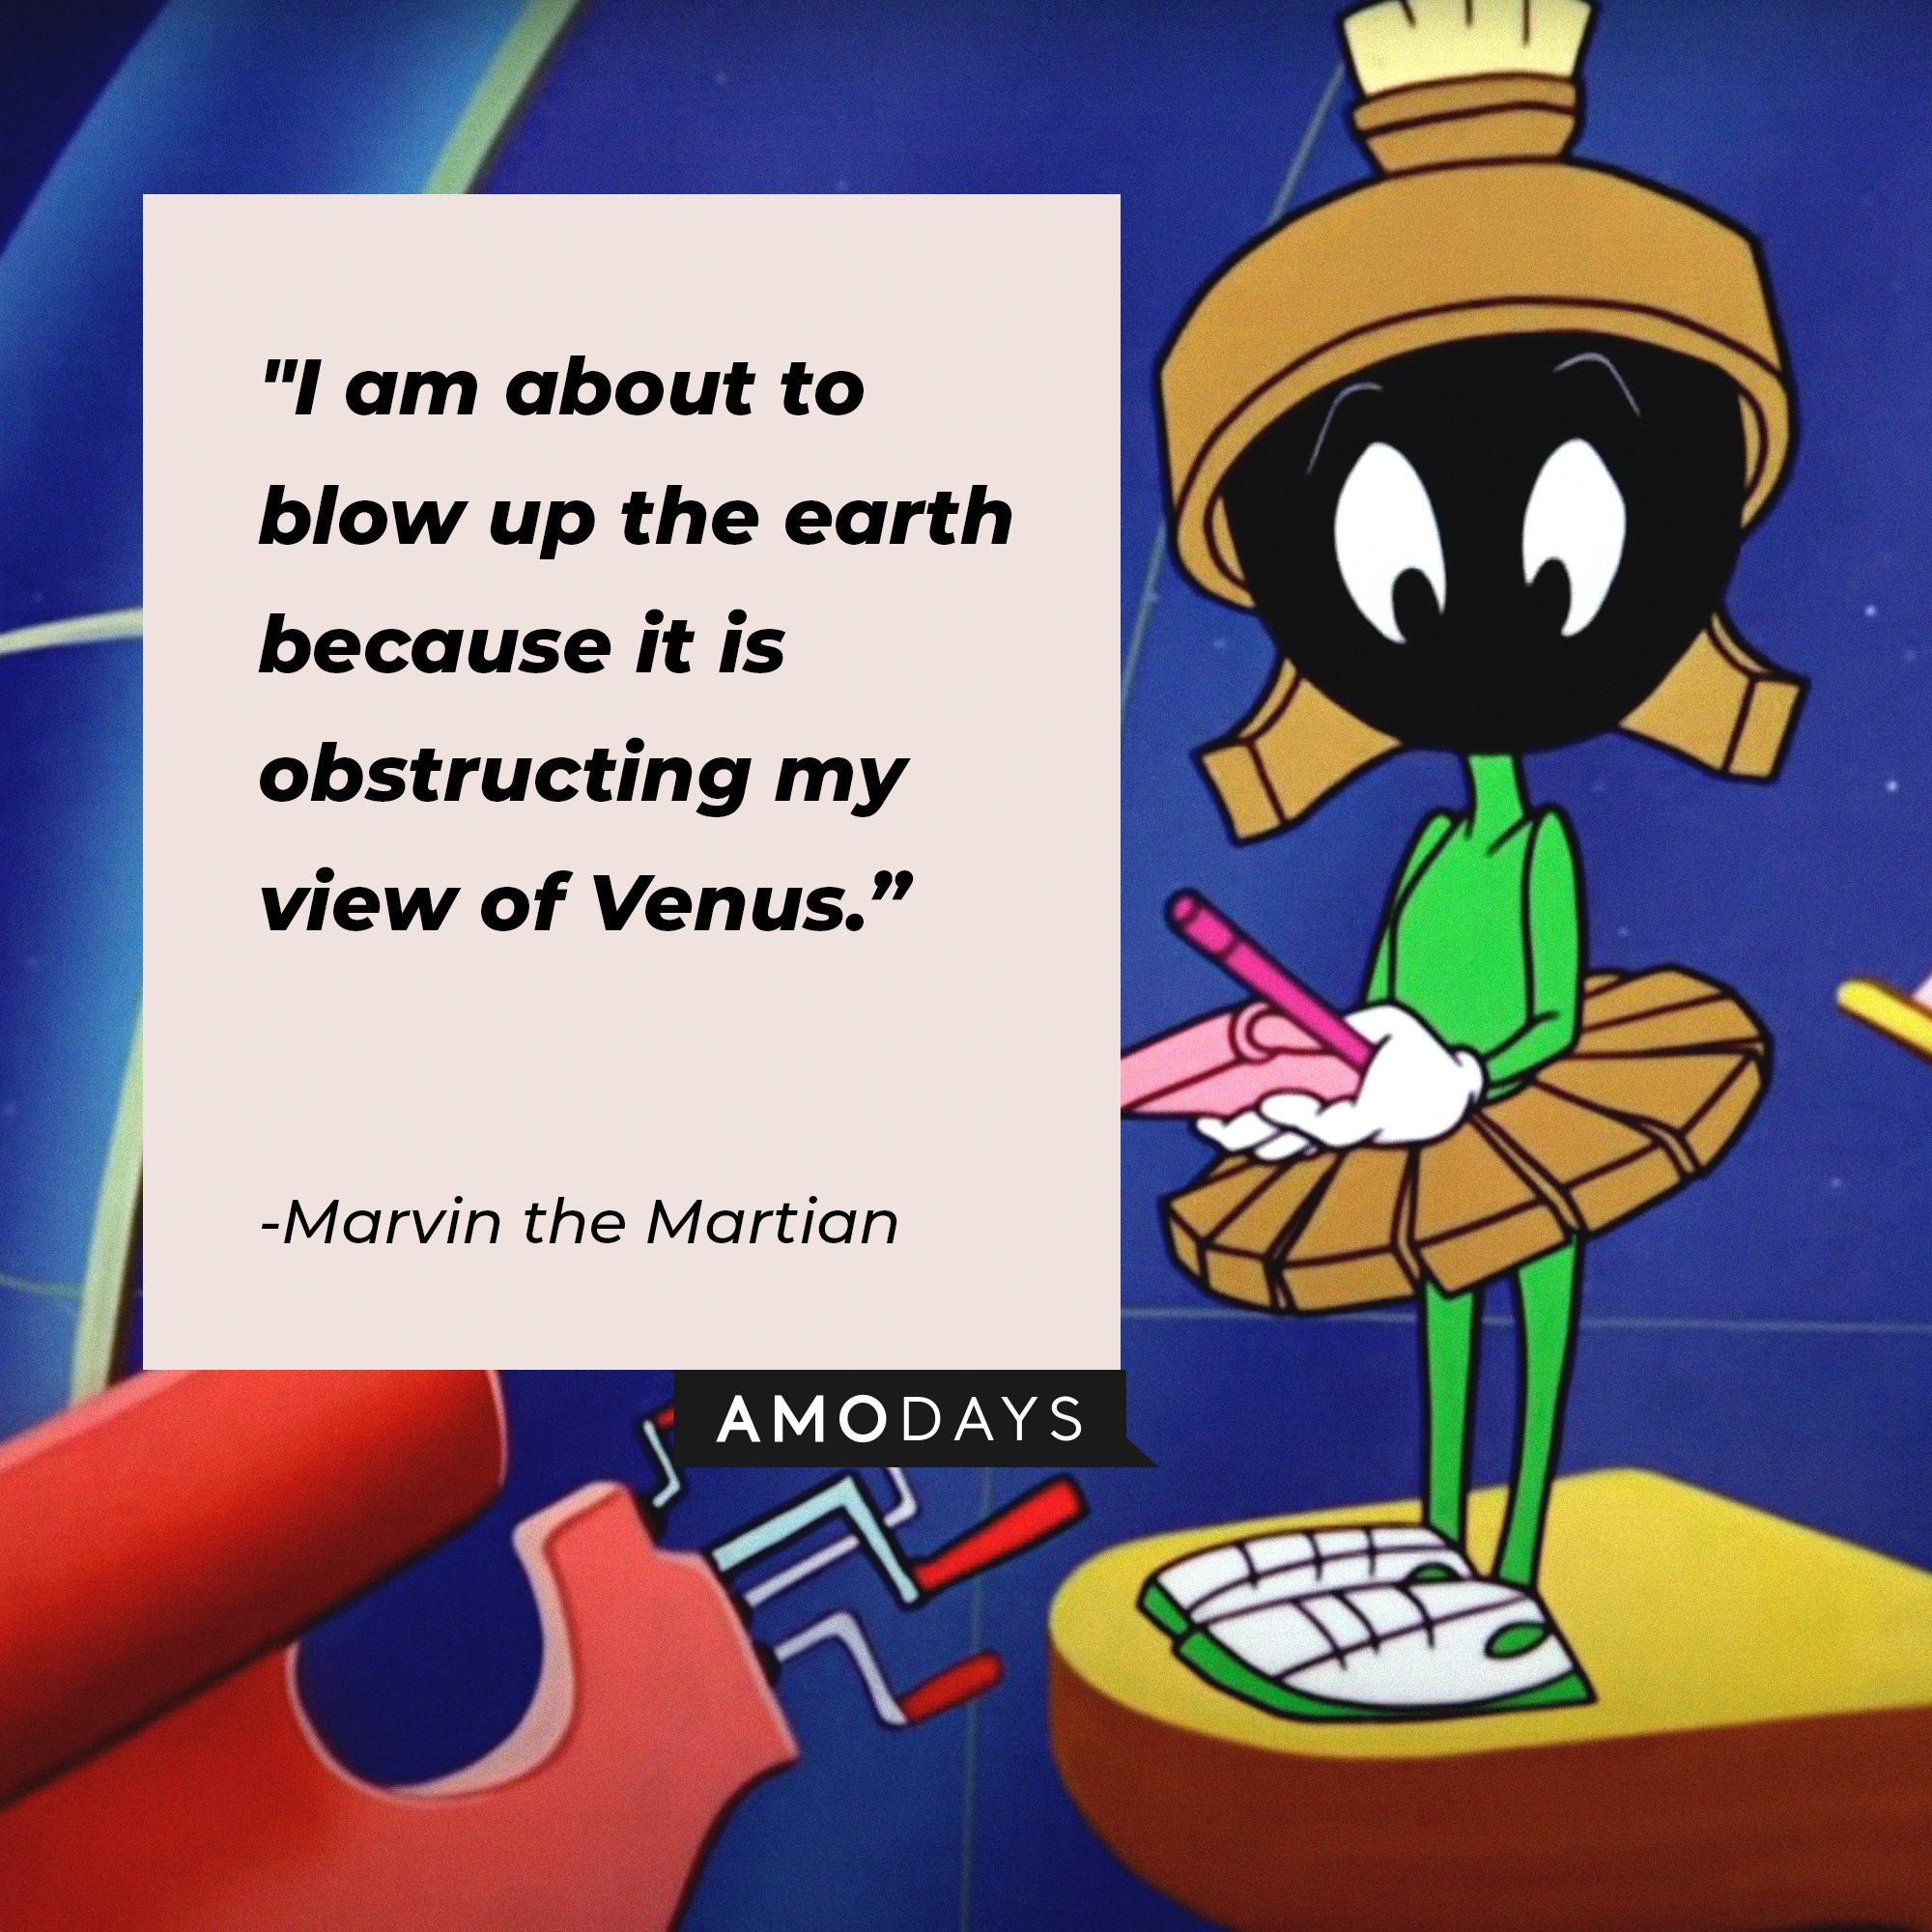 Marvin the Martian’s quote: "I am about to blow up the earth because it is obstructing my view of Venus." | Image: AmoDays